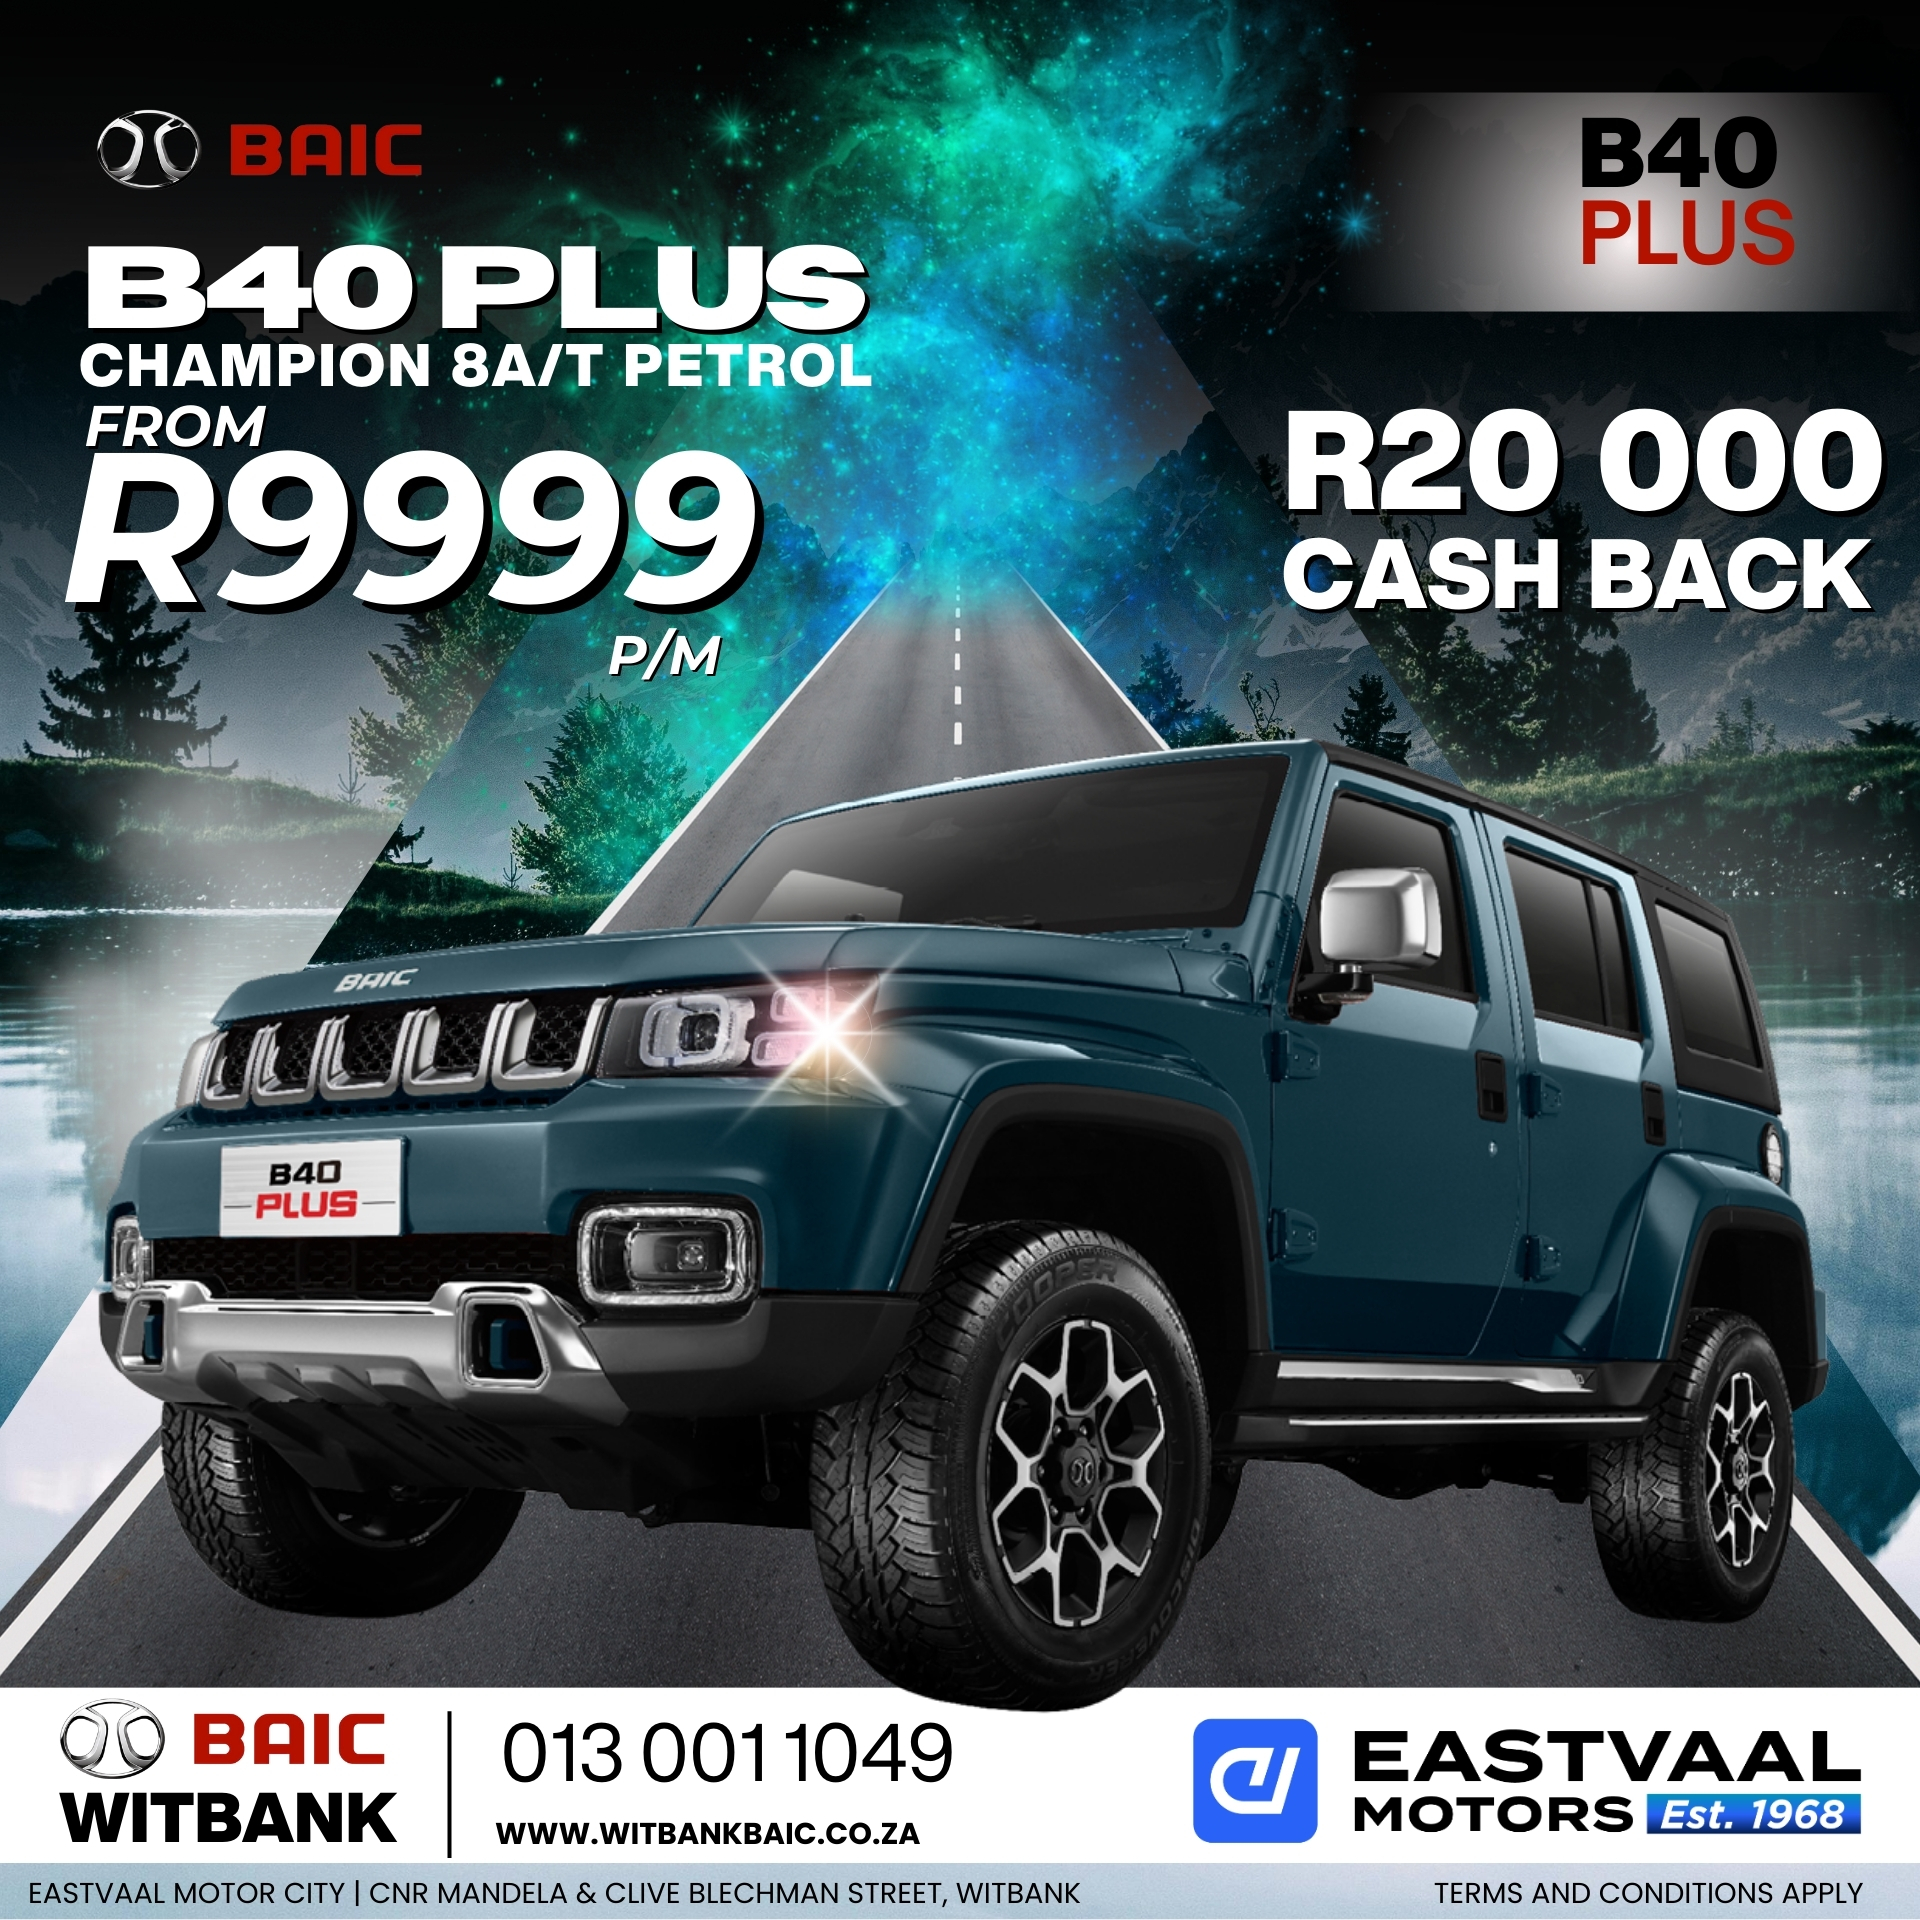 Upgrade your ride this July with BAIC from Eastvaal Motor City. Drive home in style and comfort! image from 